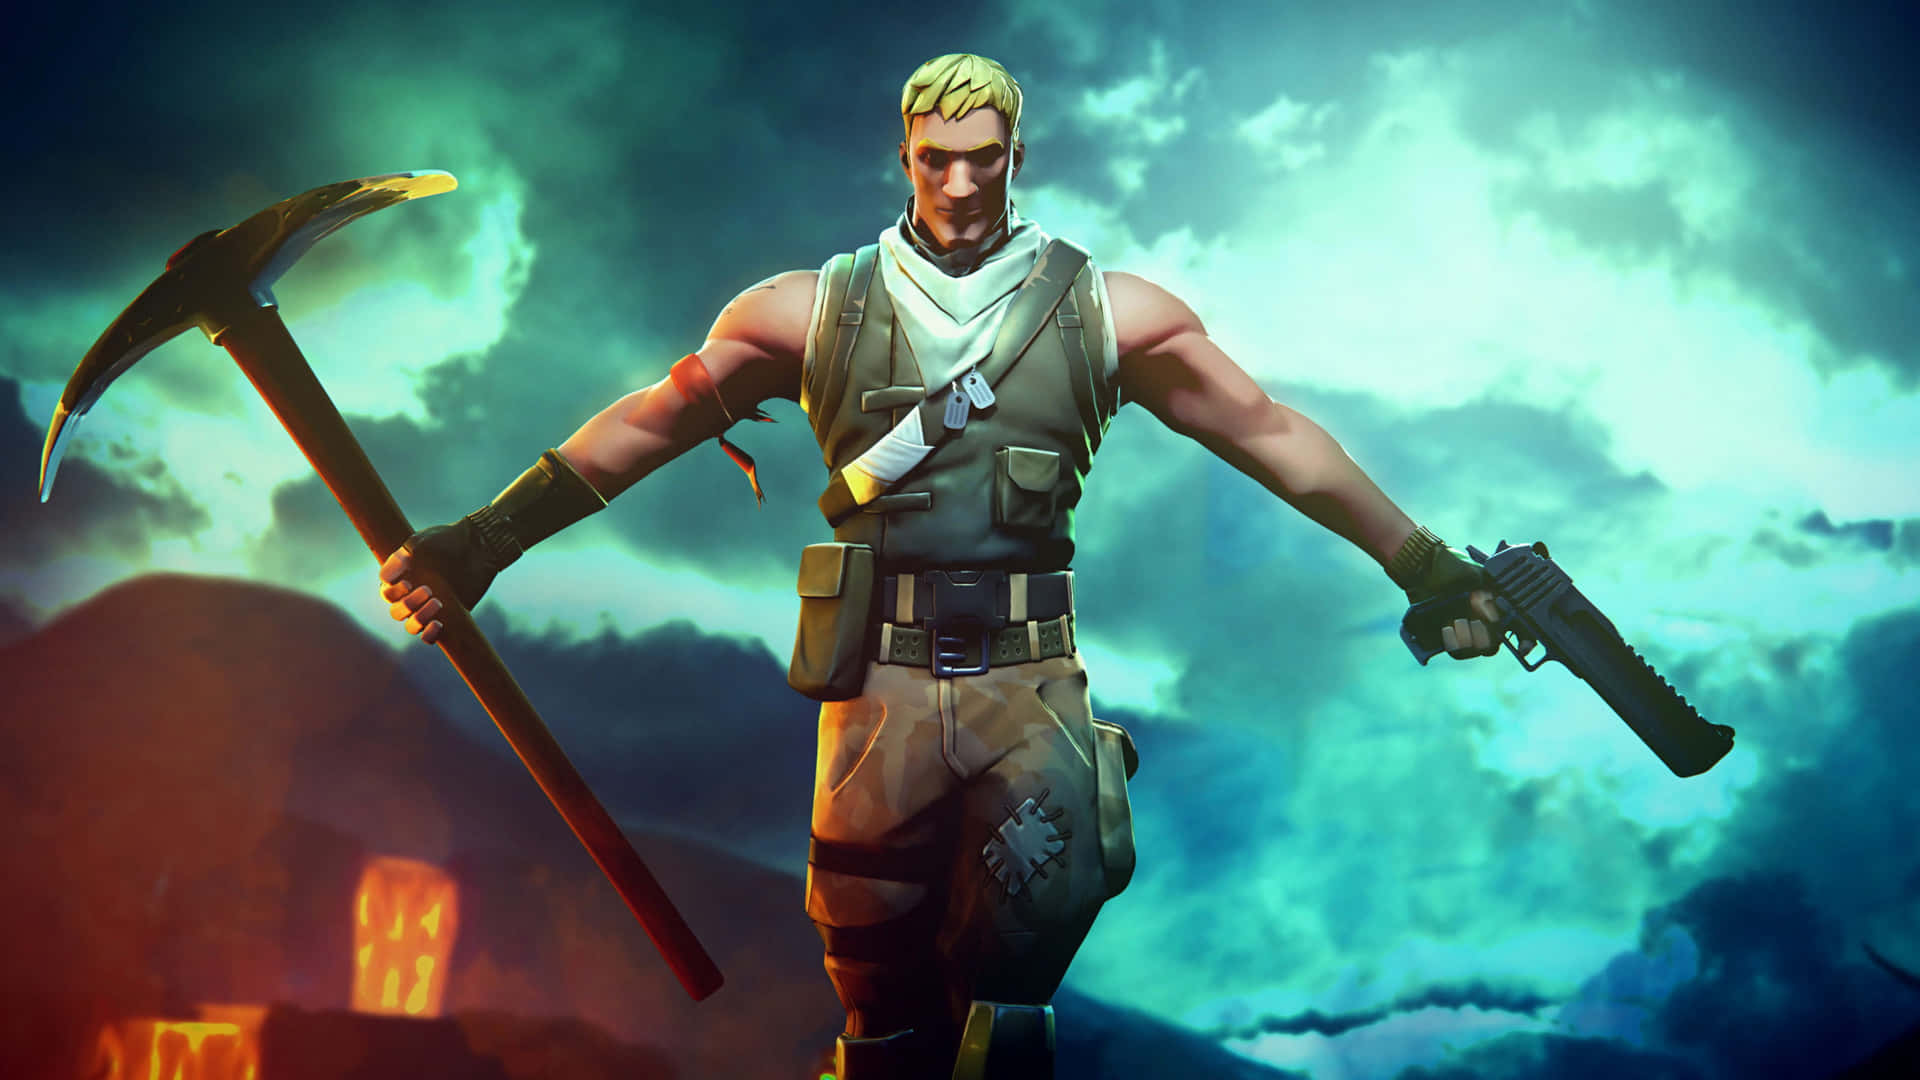 Get your Victory Royale with Jonesy in Fortnite Wallpaper